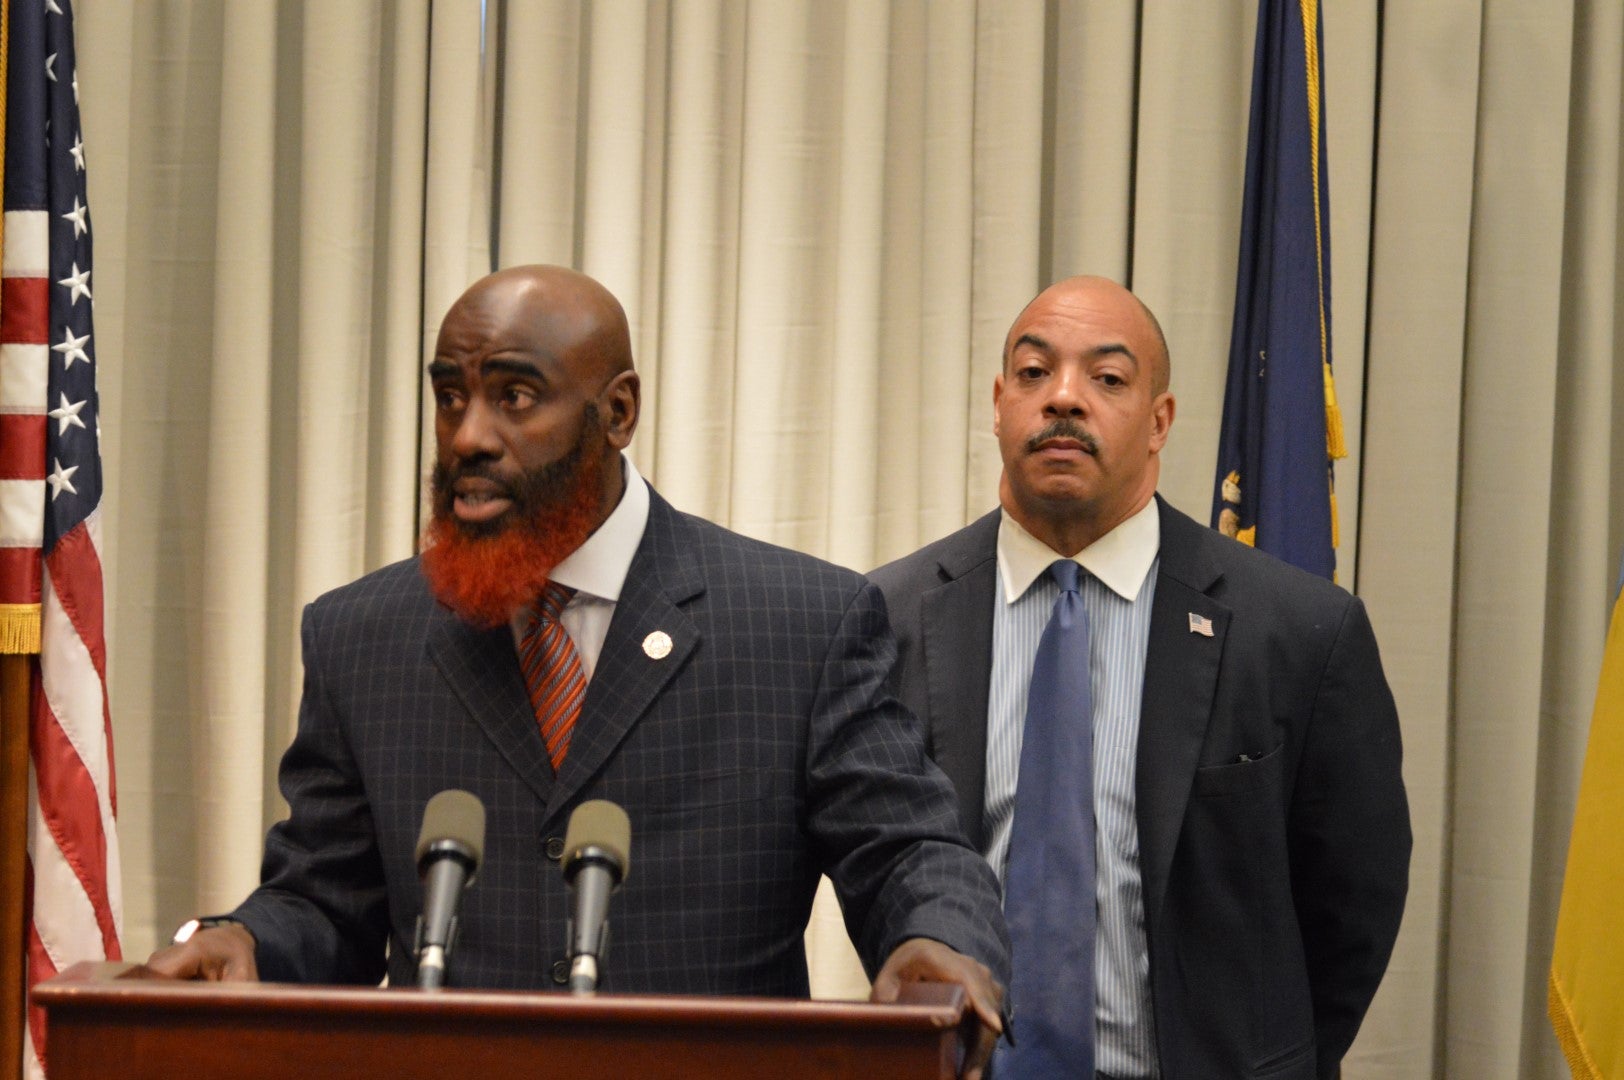 Philadelphia Deputy District Attorney Tariq El Shabazz and District Attorney Seth Williams discuss the shooting incident involving Officer Dorion Young. (Tom MacDonald/WHYY)